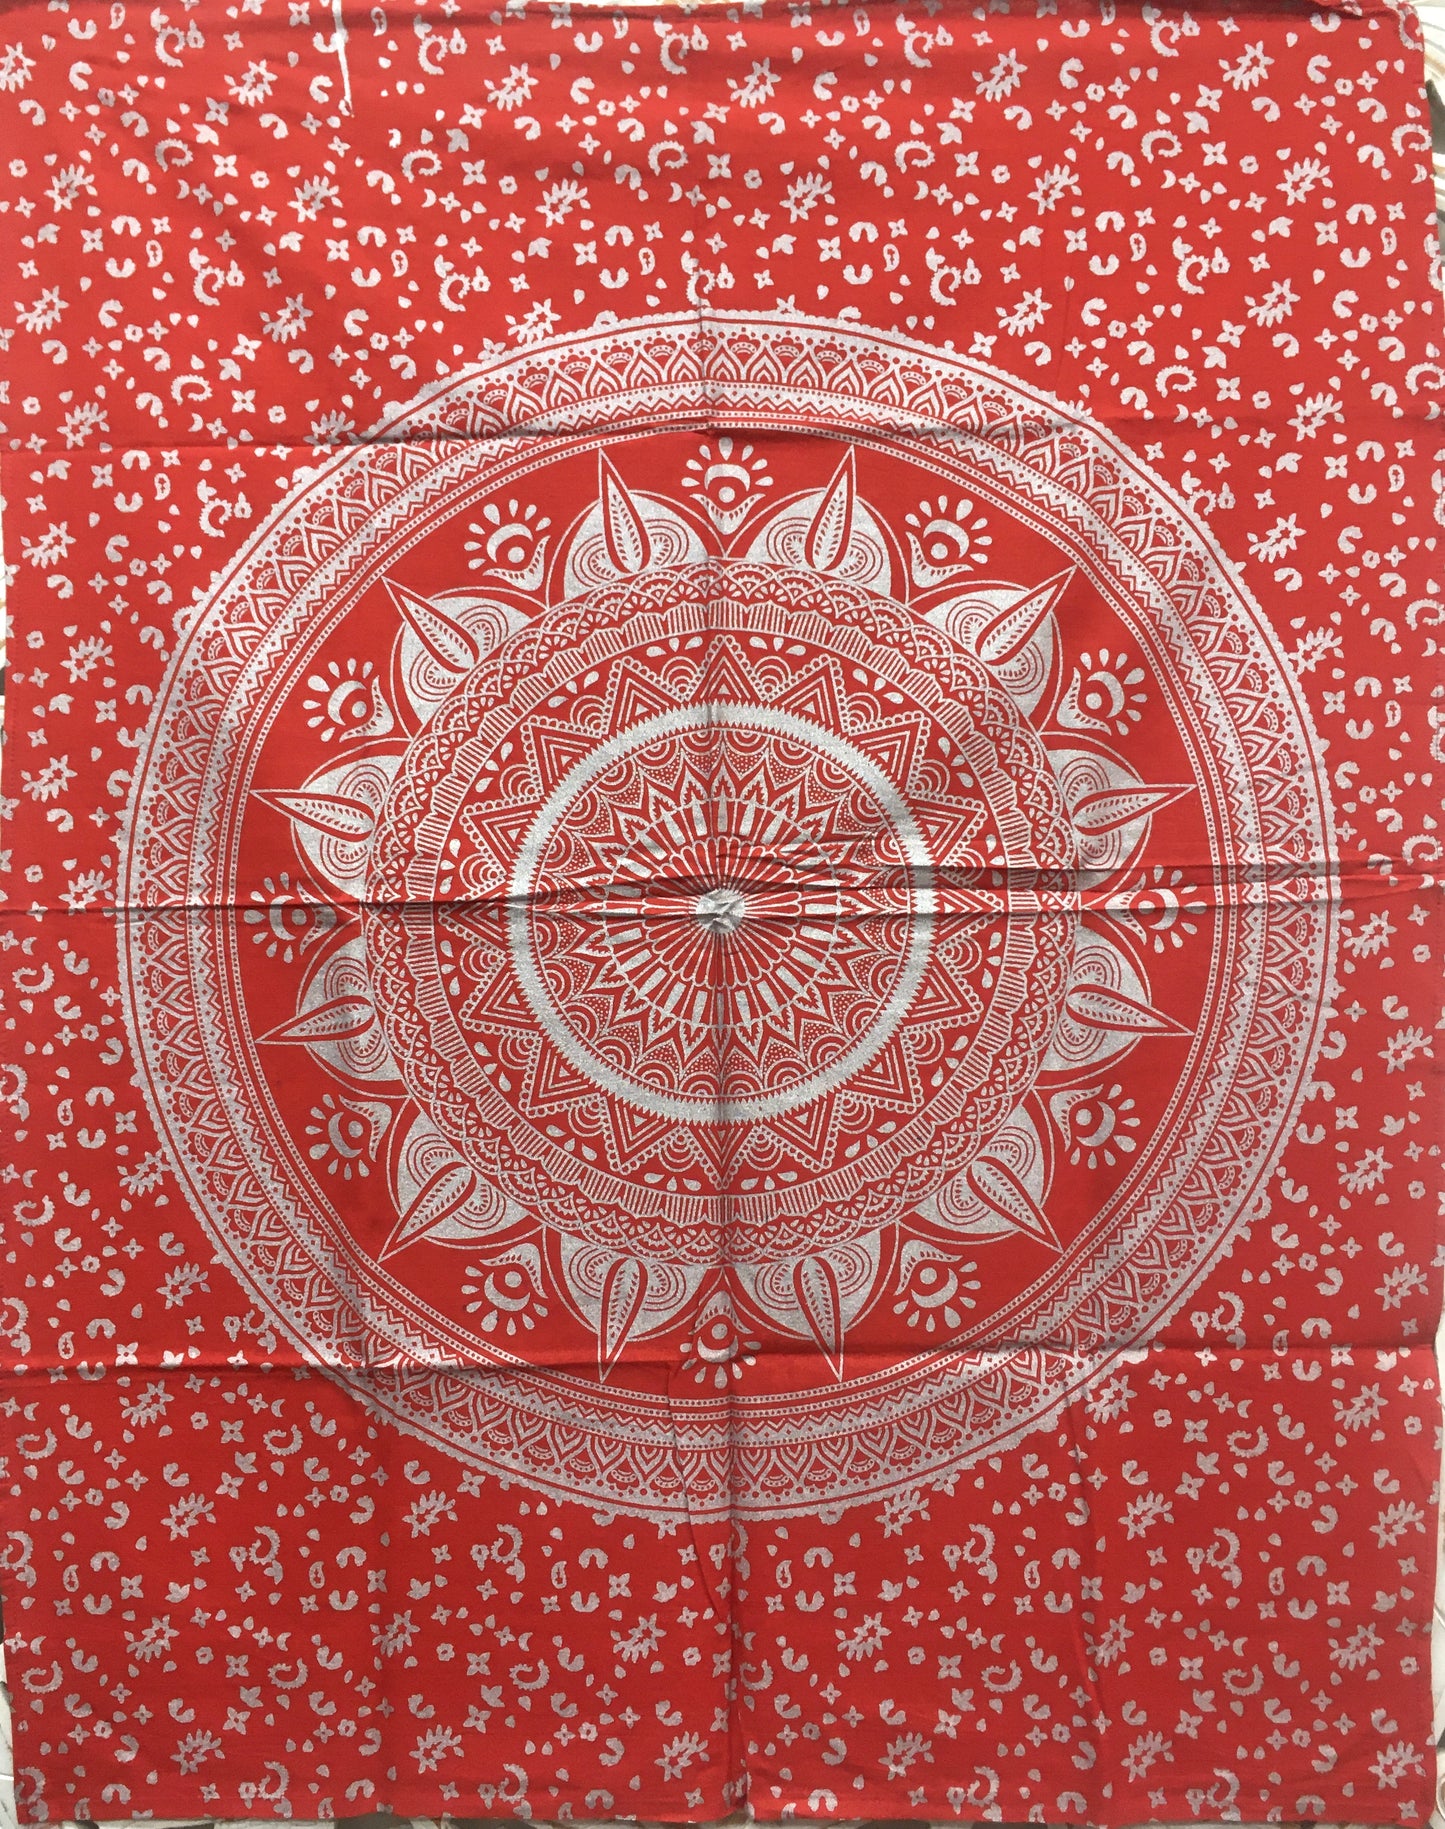 Hand printed Gold/Silver print Mini Compass Mandala Fabric Poster Tapestries - 8 Variations available